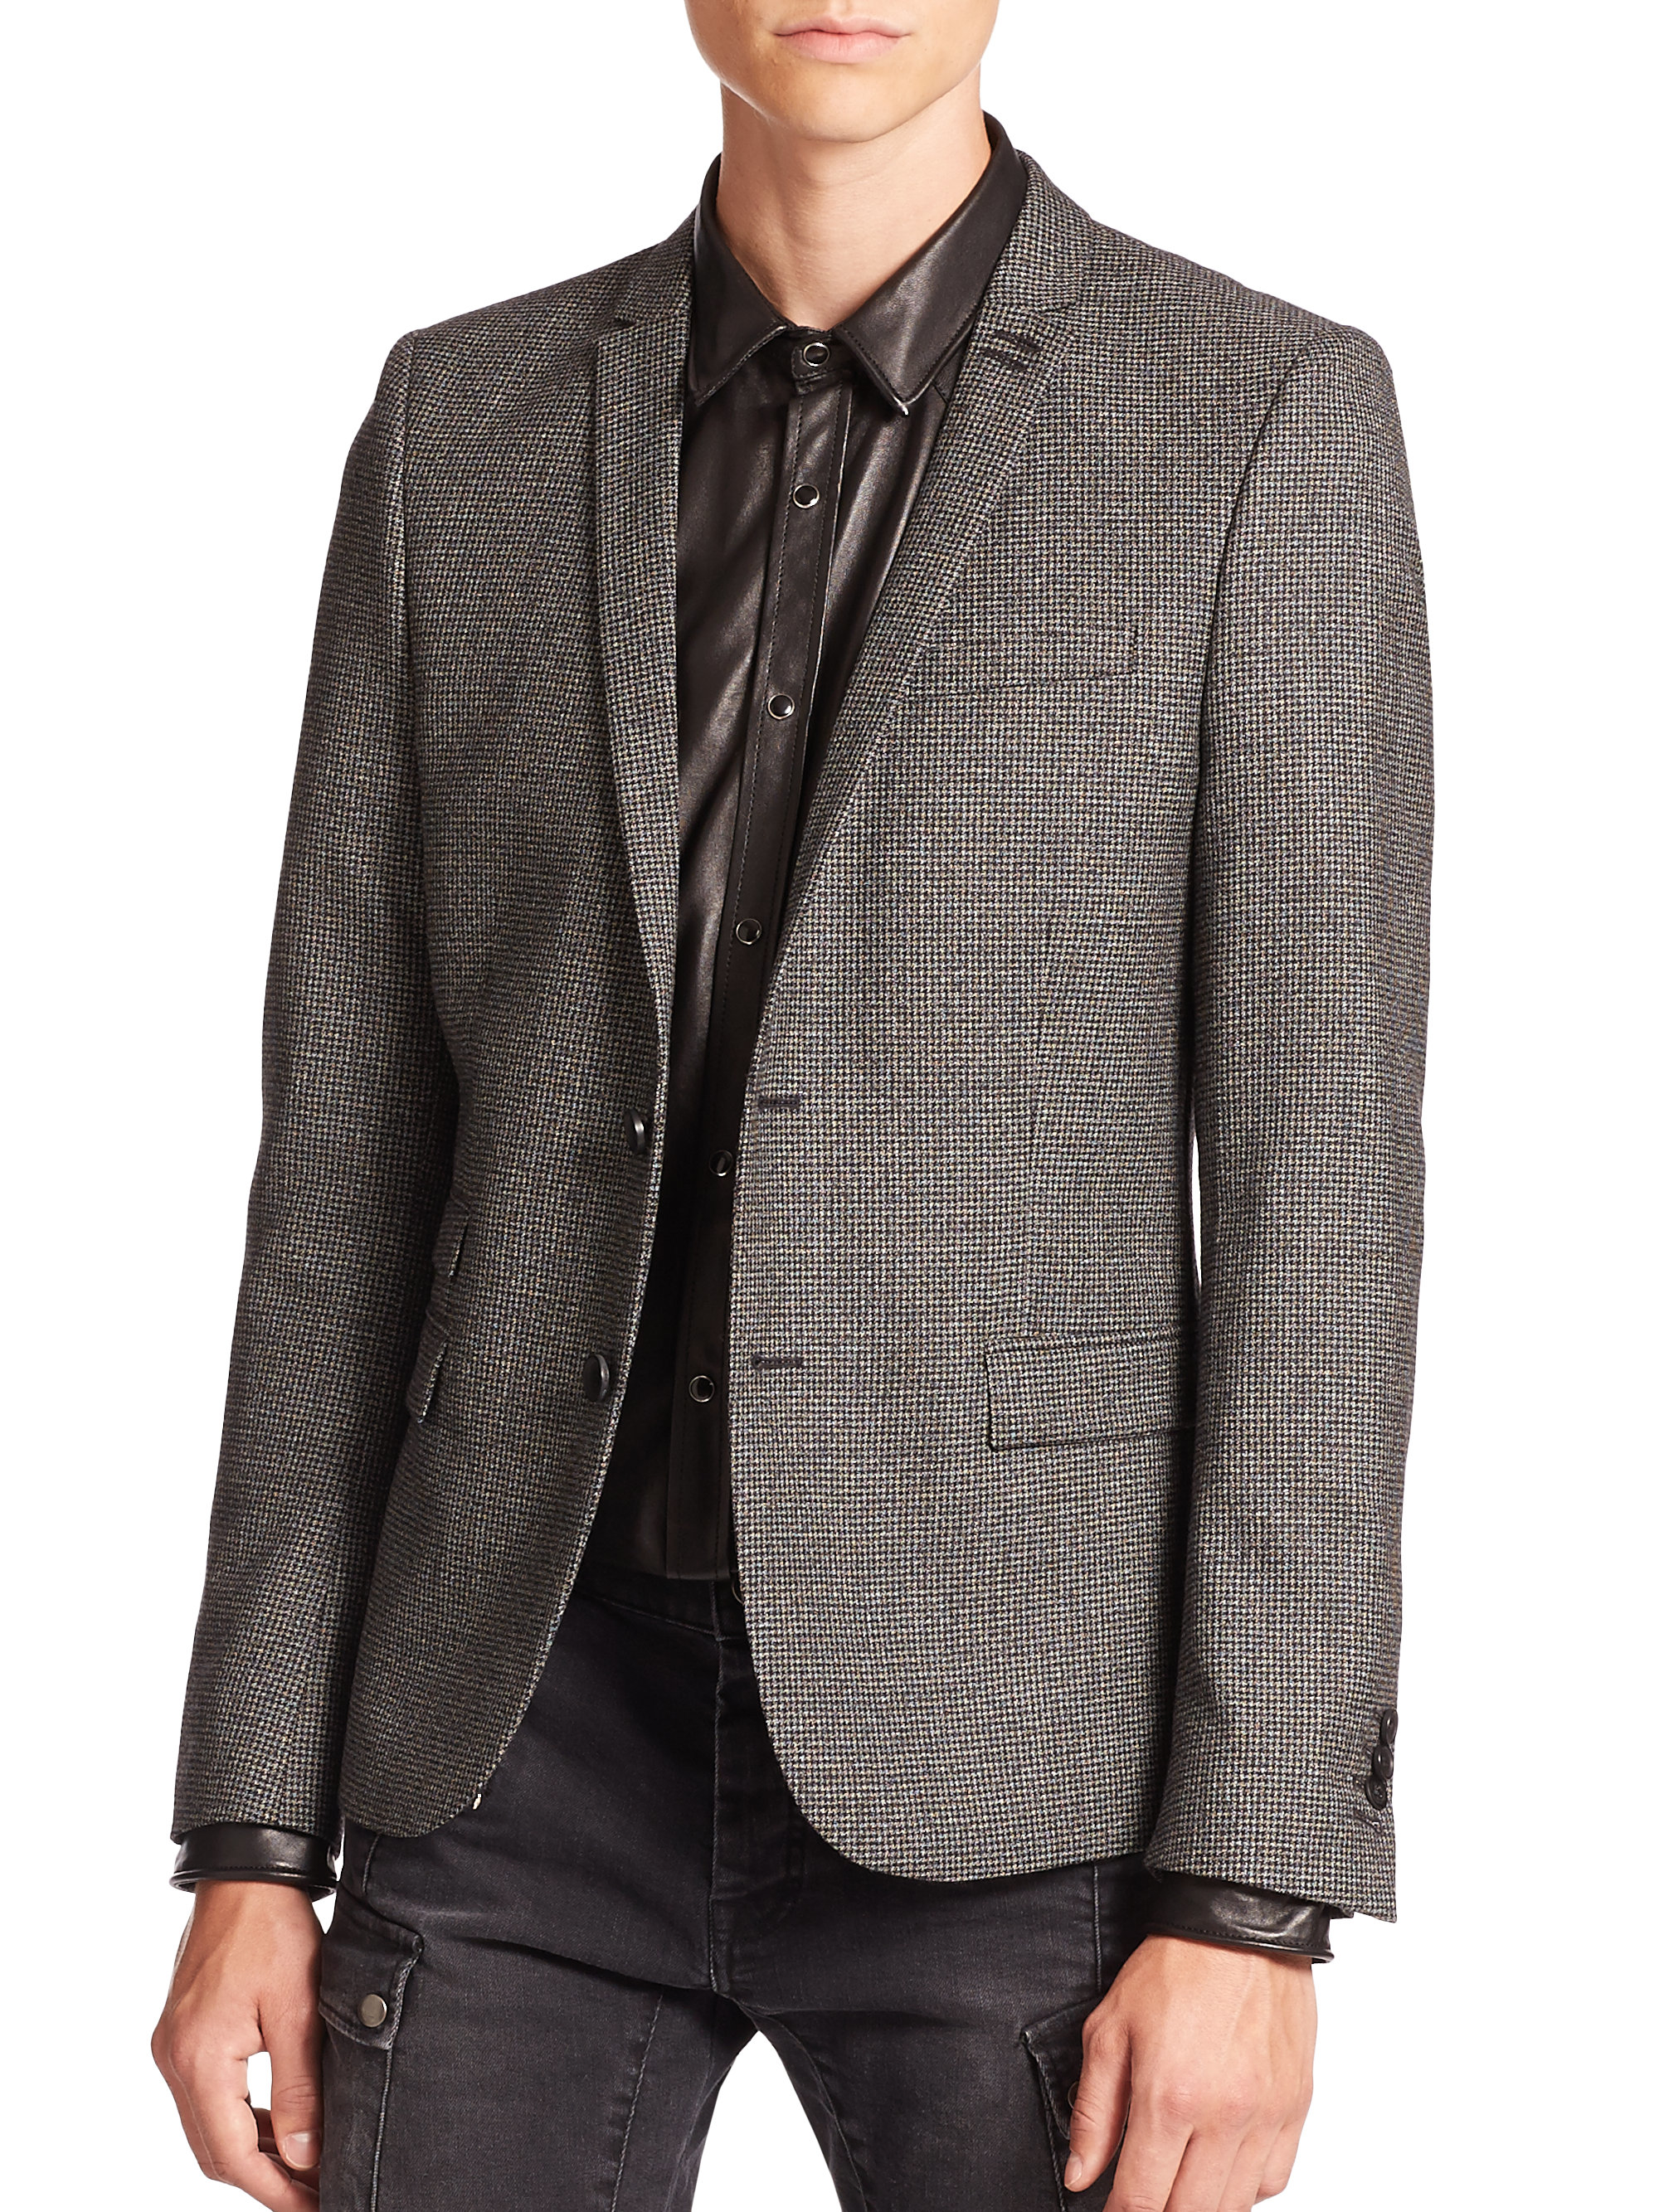 Lyst - The Kooples Houndstooth Wool Jacket in Gray for Men